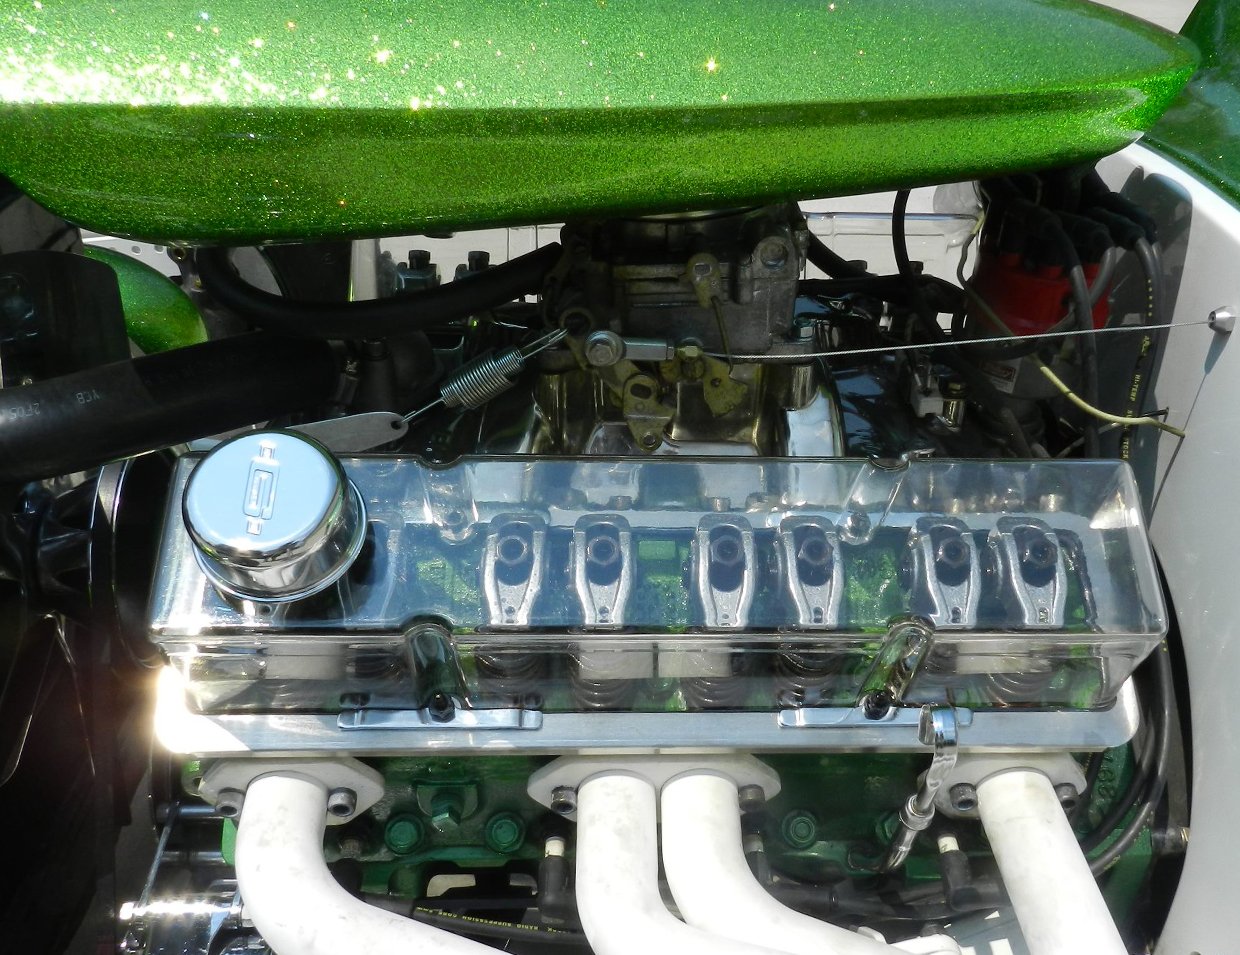 Look Inside a V8 Engine with a Clear Valve Cover